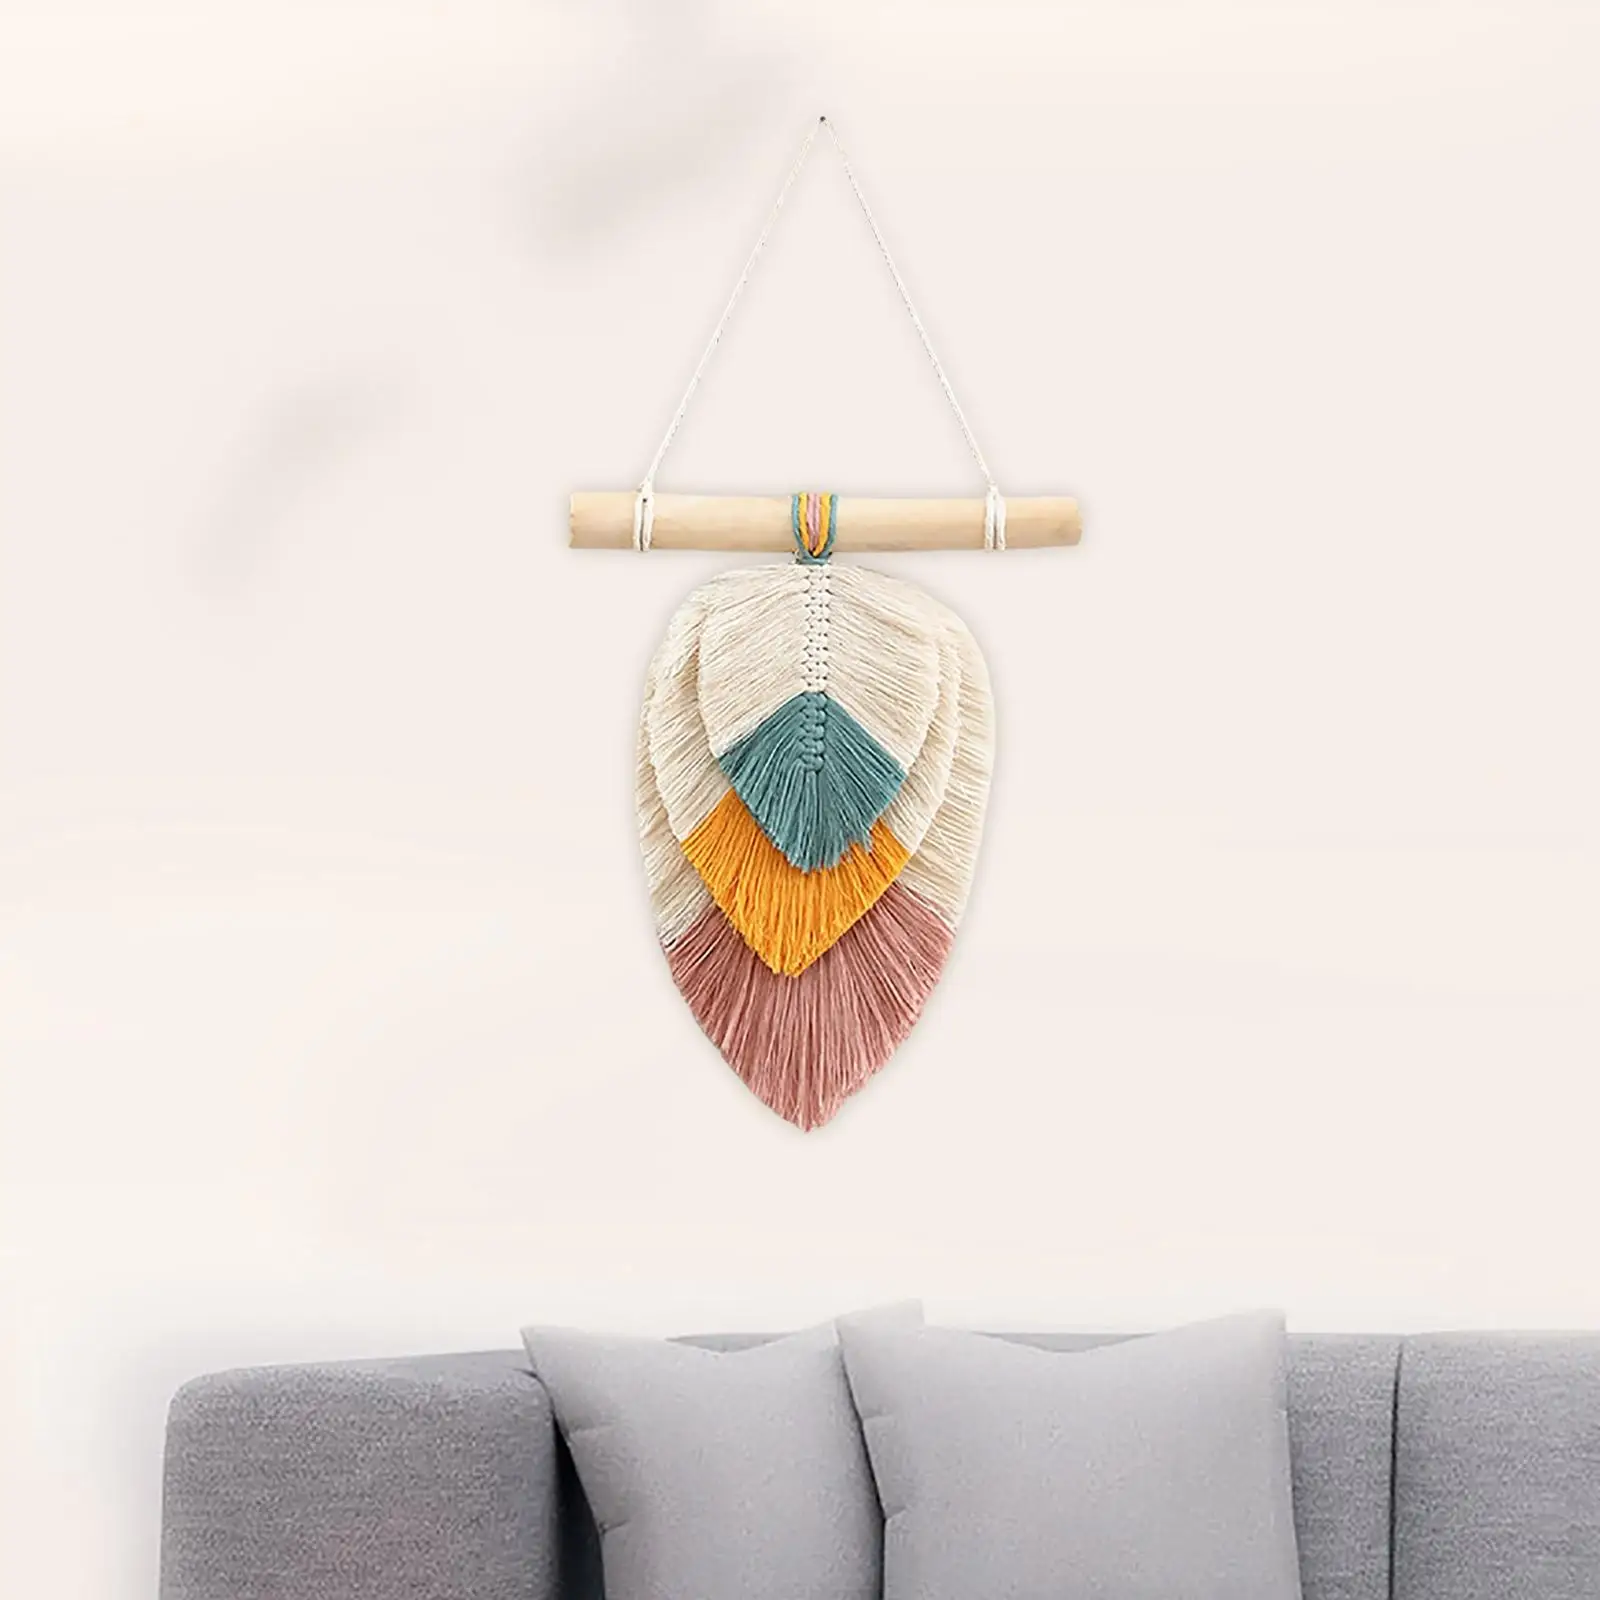 Nordic Macrame Wall Hanging Tapestry Handwoven Wall Art Pendant for Living Room Dorm Bedroom Party Ornament